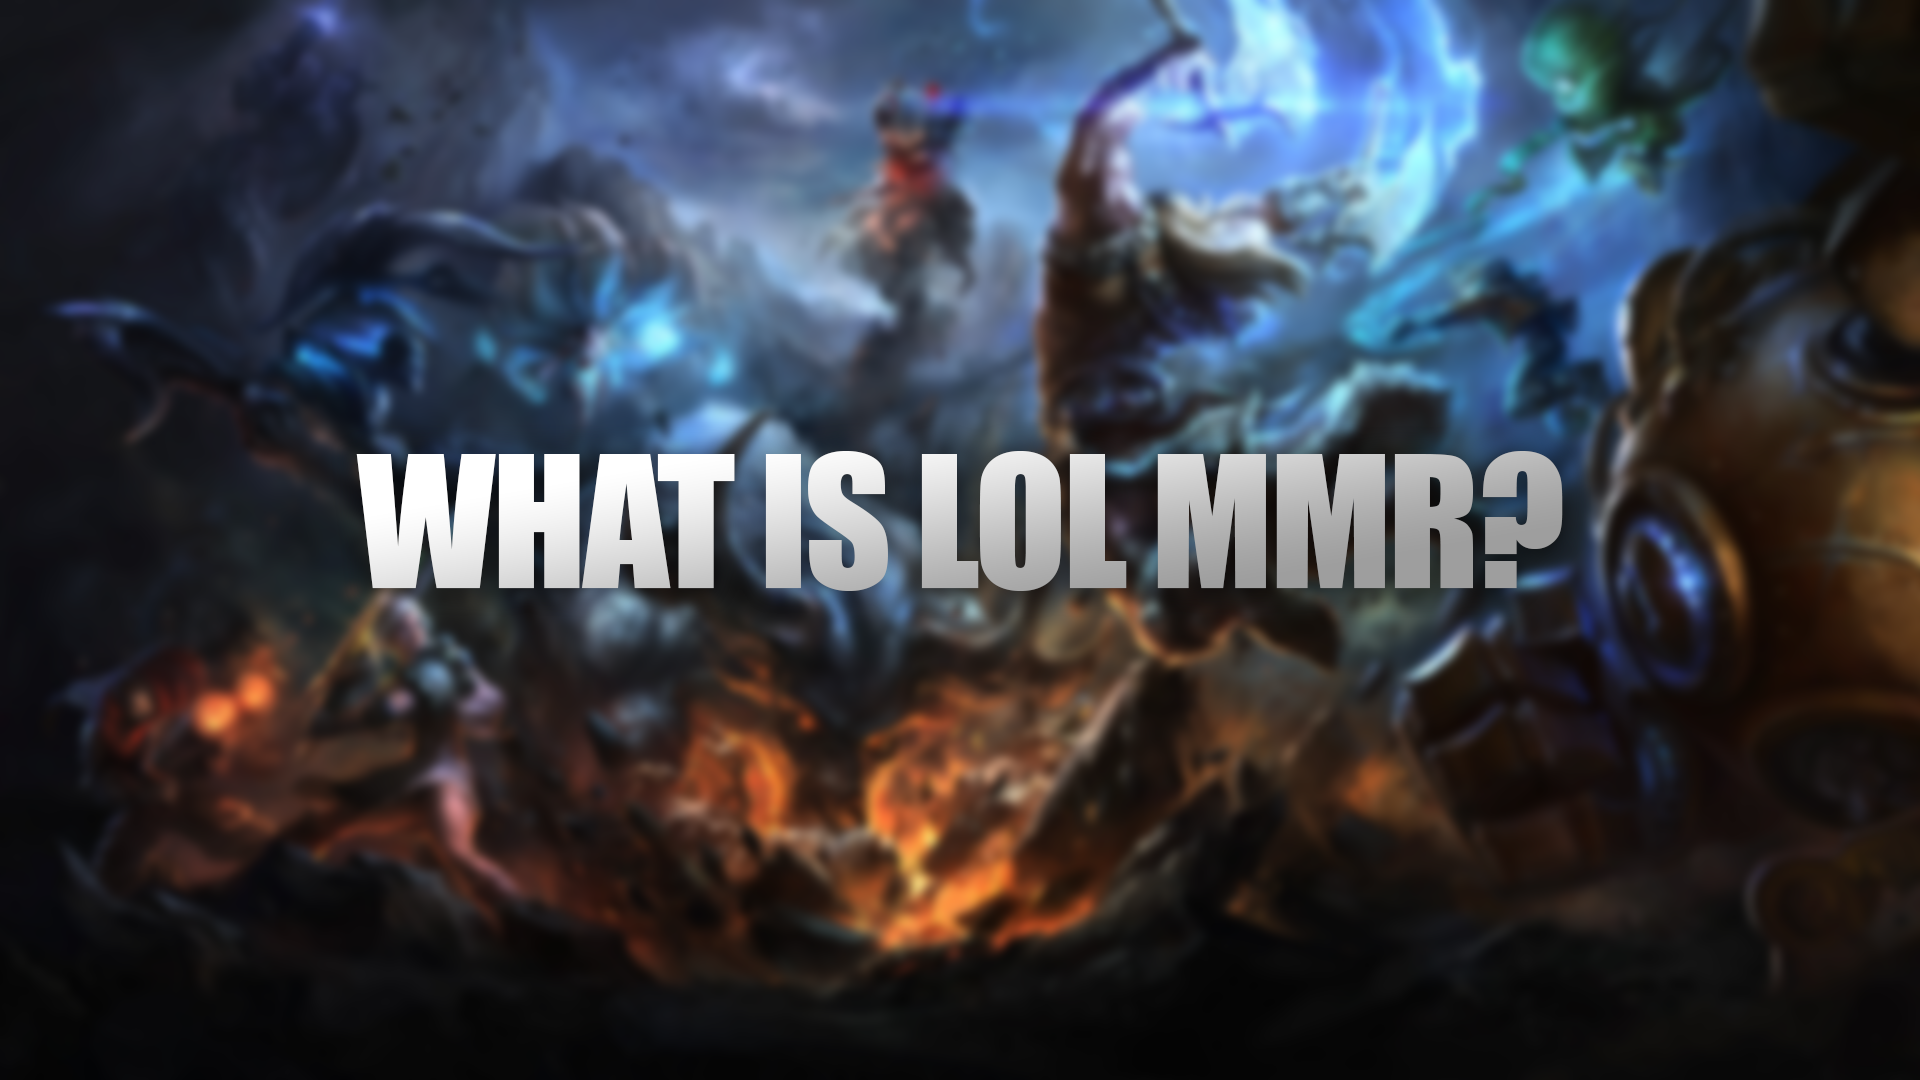 Your Matchmaking Rating (MMR) is the hidden number Riot Games uses to match you into fair League of Legends games. It represents your overall skill level. When you win more games, your MMR goes up. When you lose more games, your MMR goes down.